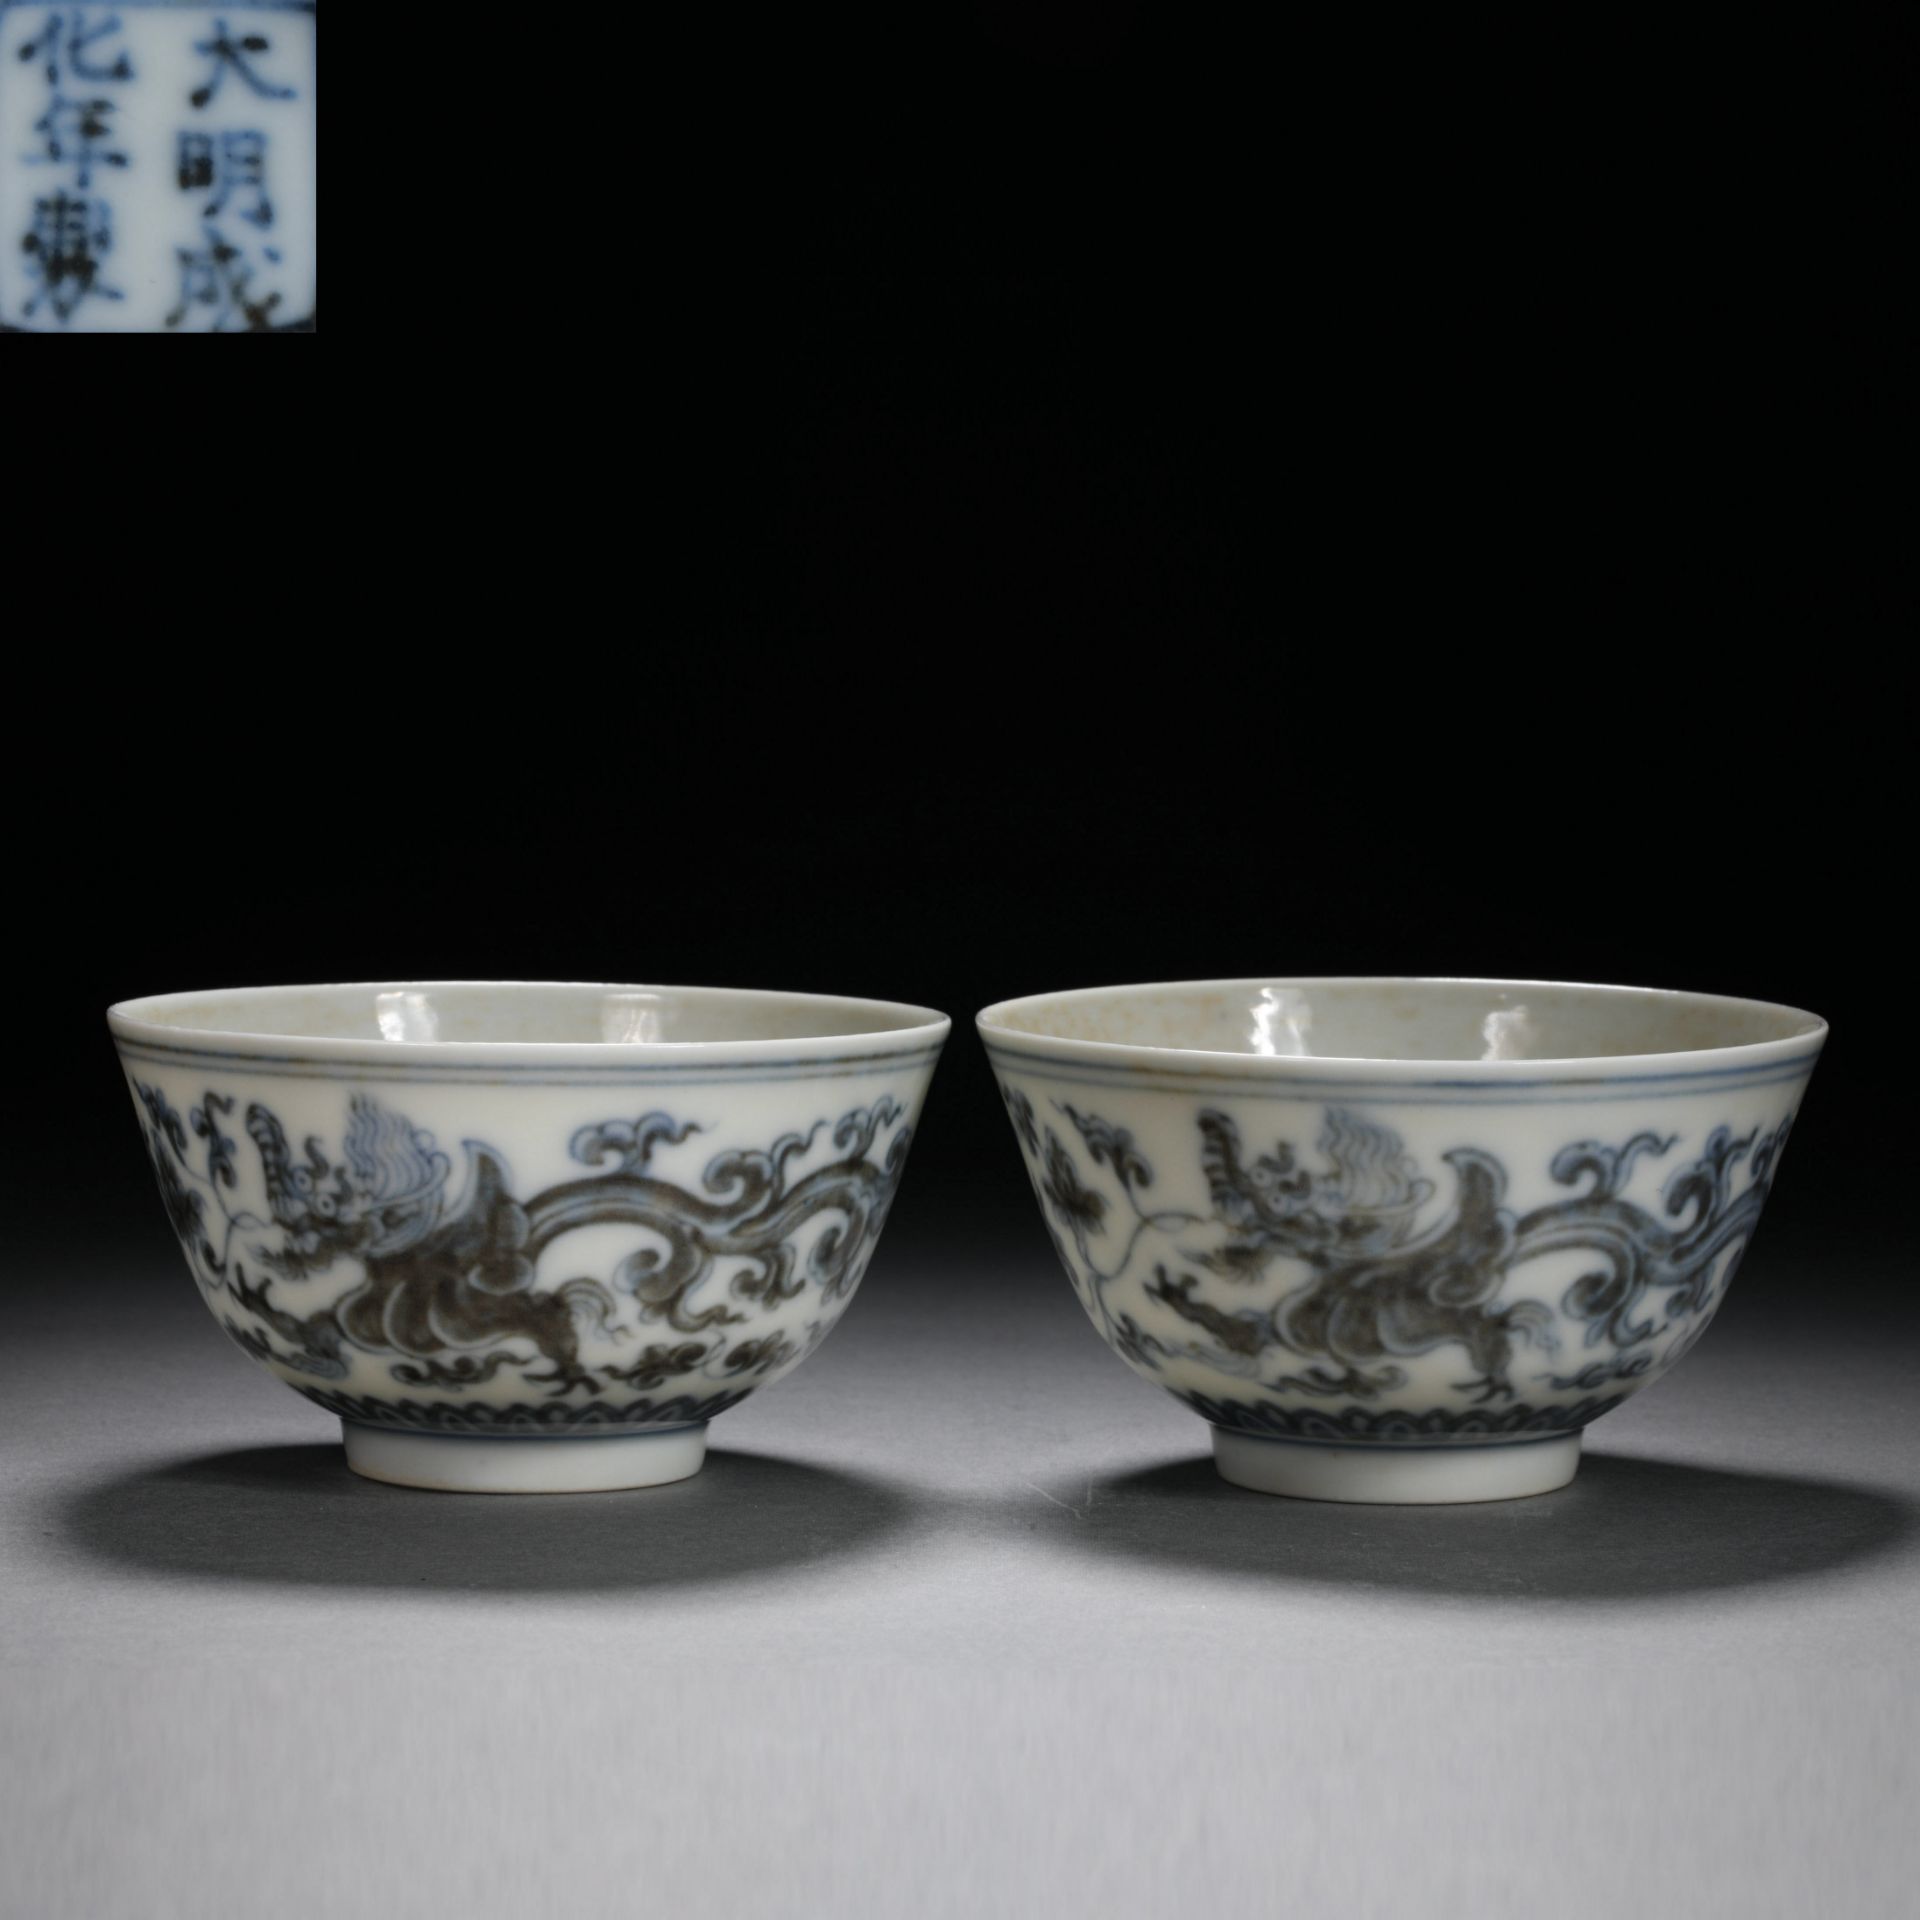 A pair of Ming dynasty blue and white porcelain carved dragon pattern bowls